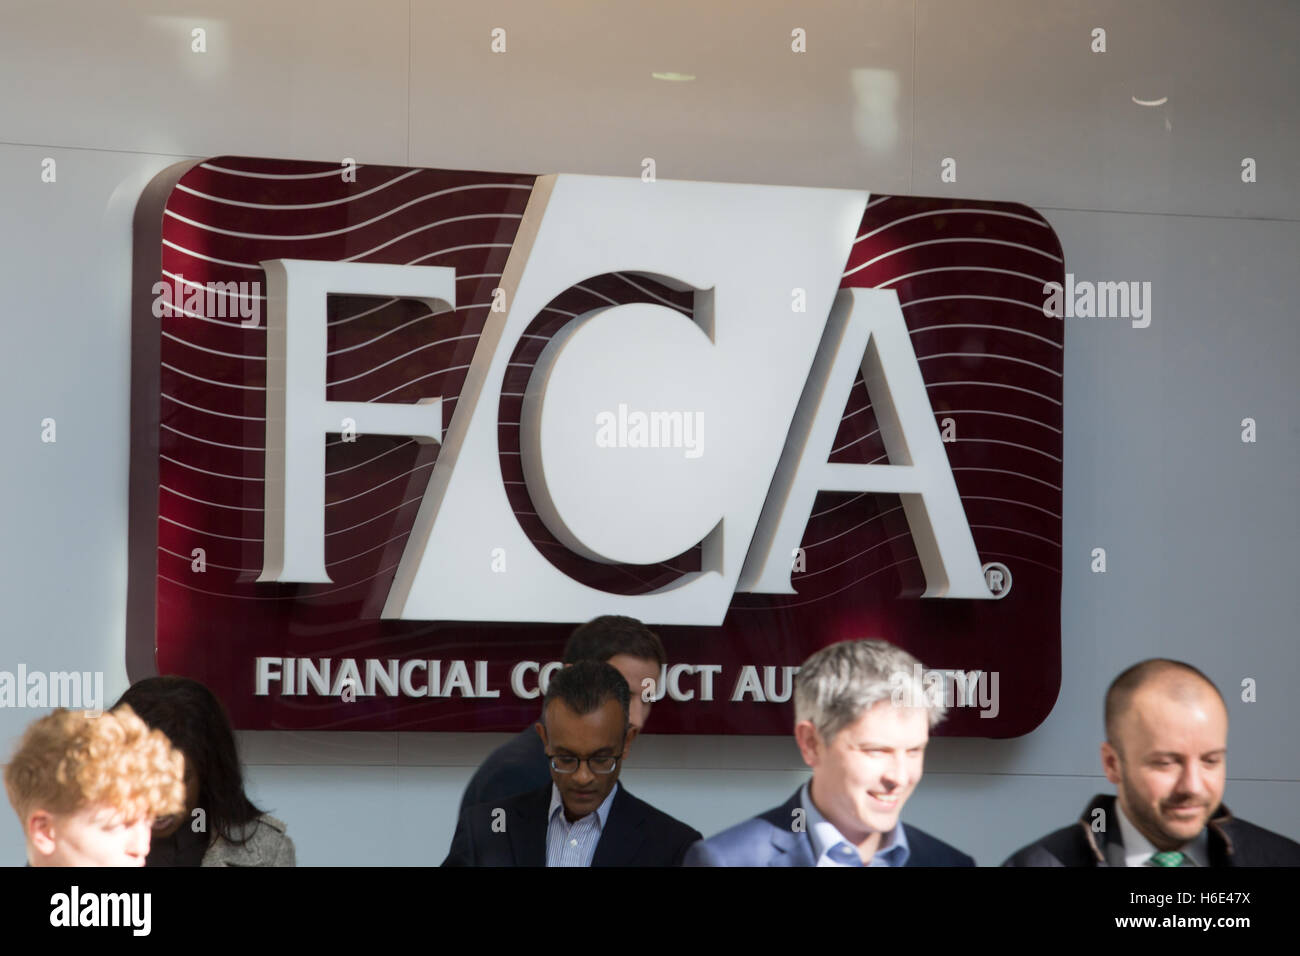 The offices of the Financial Conduct Authority (FCA) in Canary Wharf, London Stock Photo